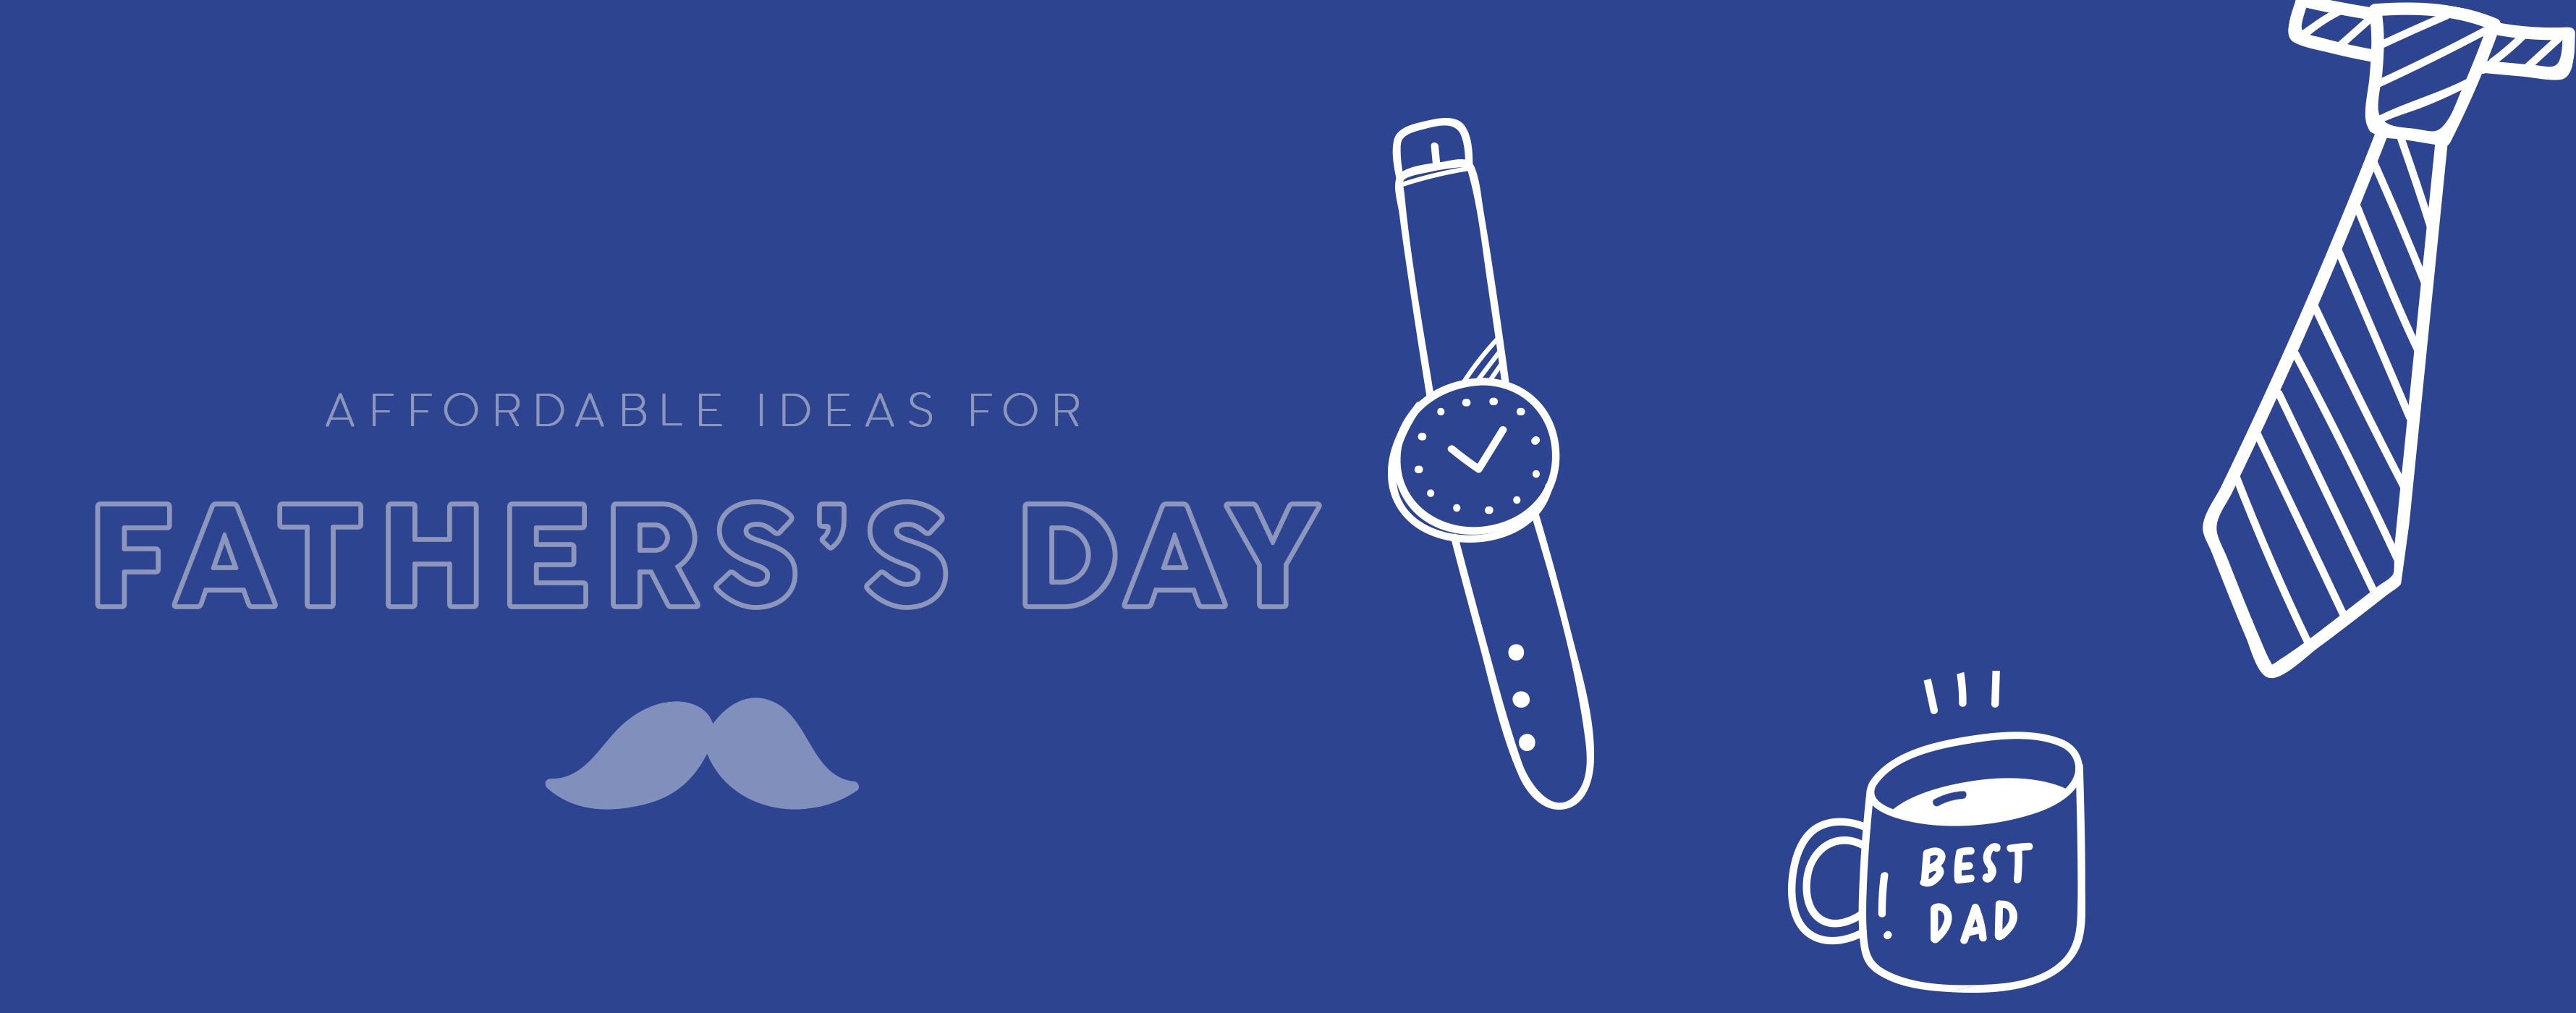 Affordable Father’s Day Gifts